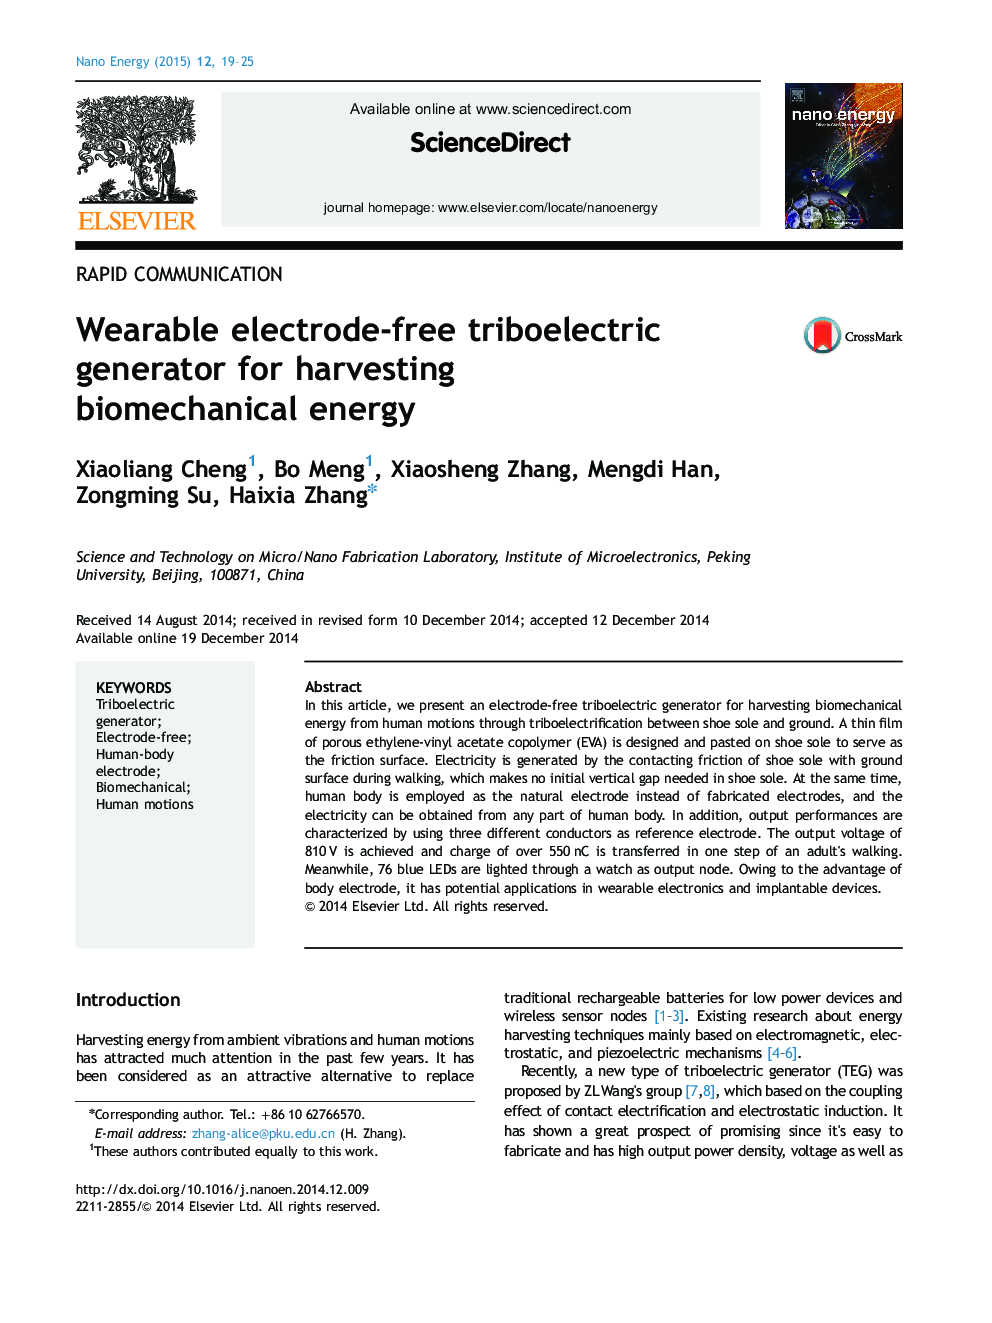 Wearable electrode-free triboelectric generator for harvesting biomechanical energy